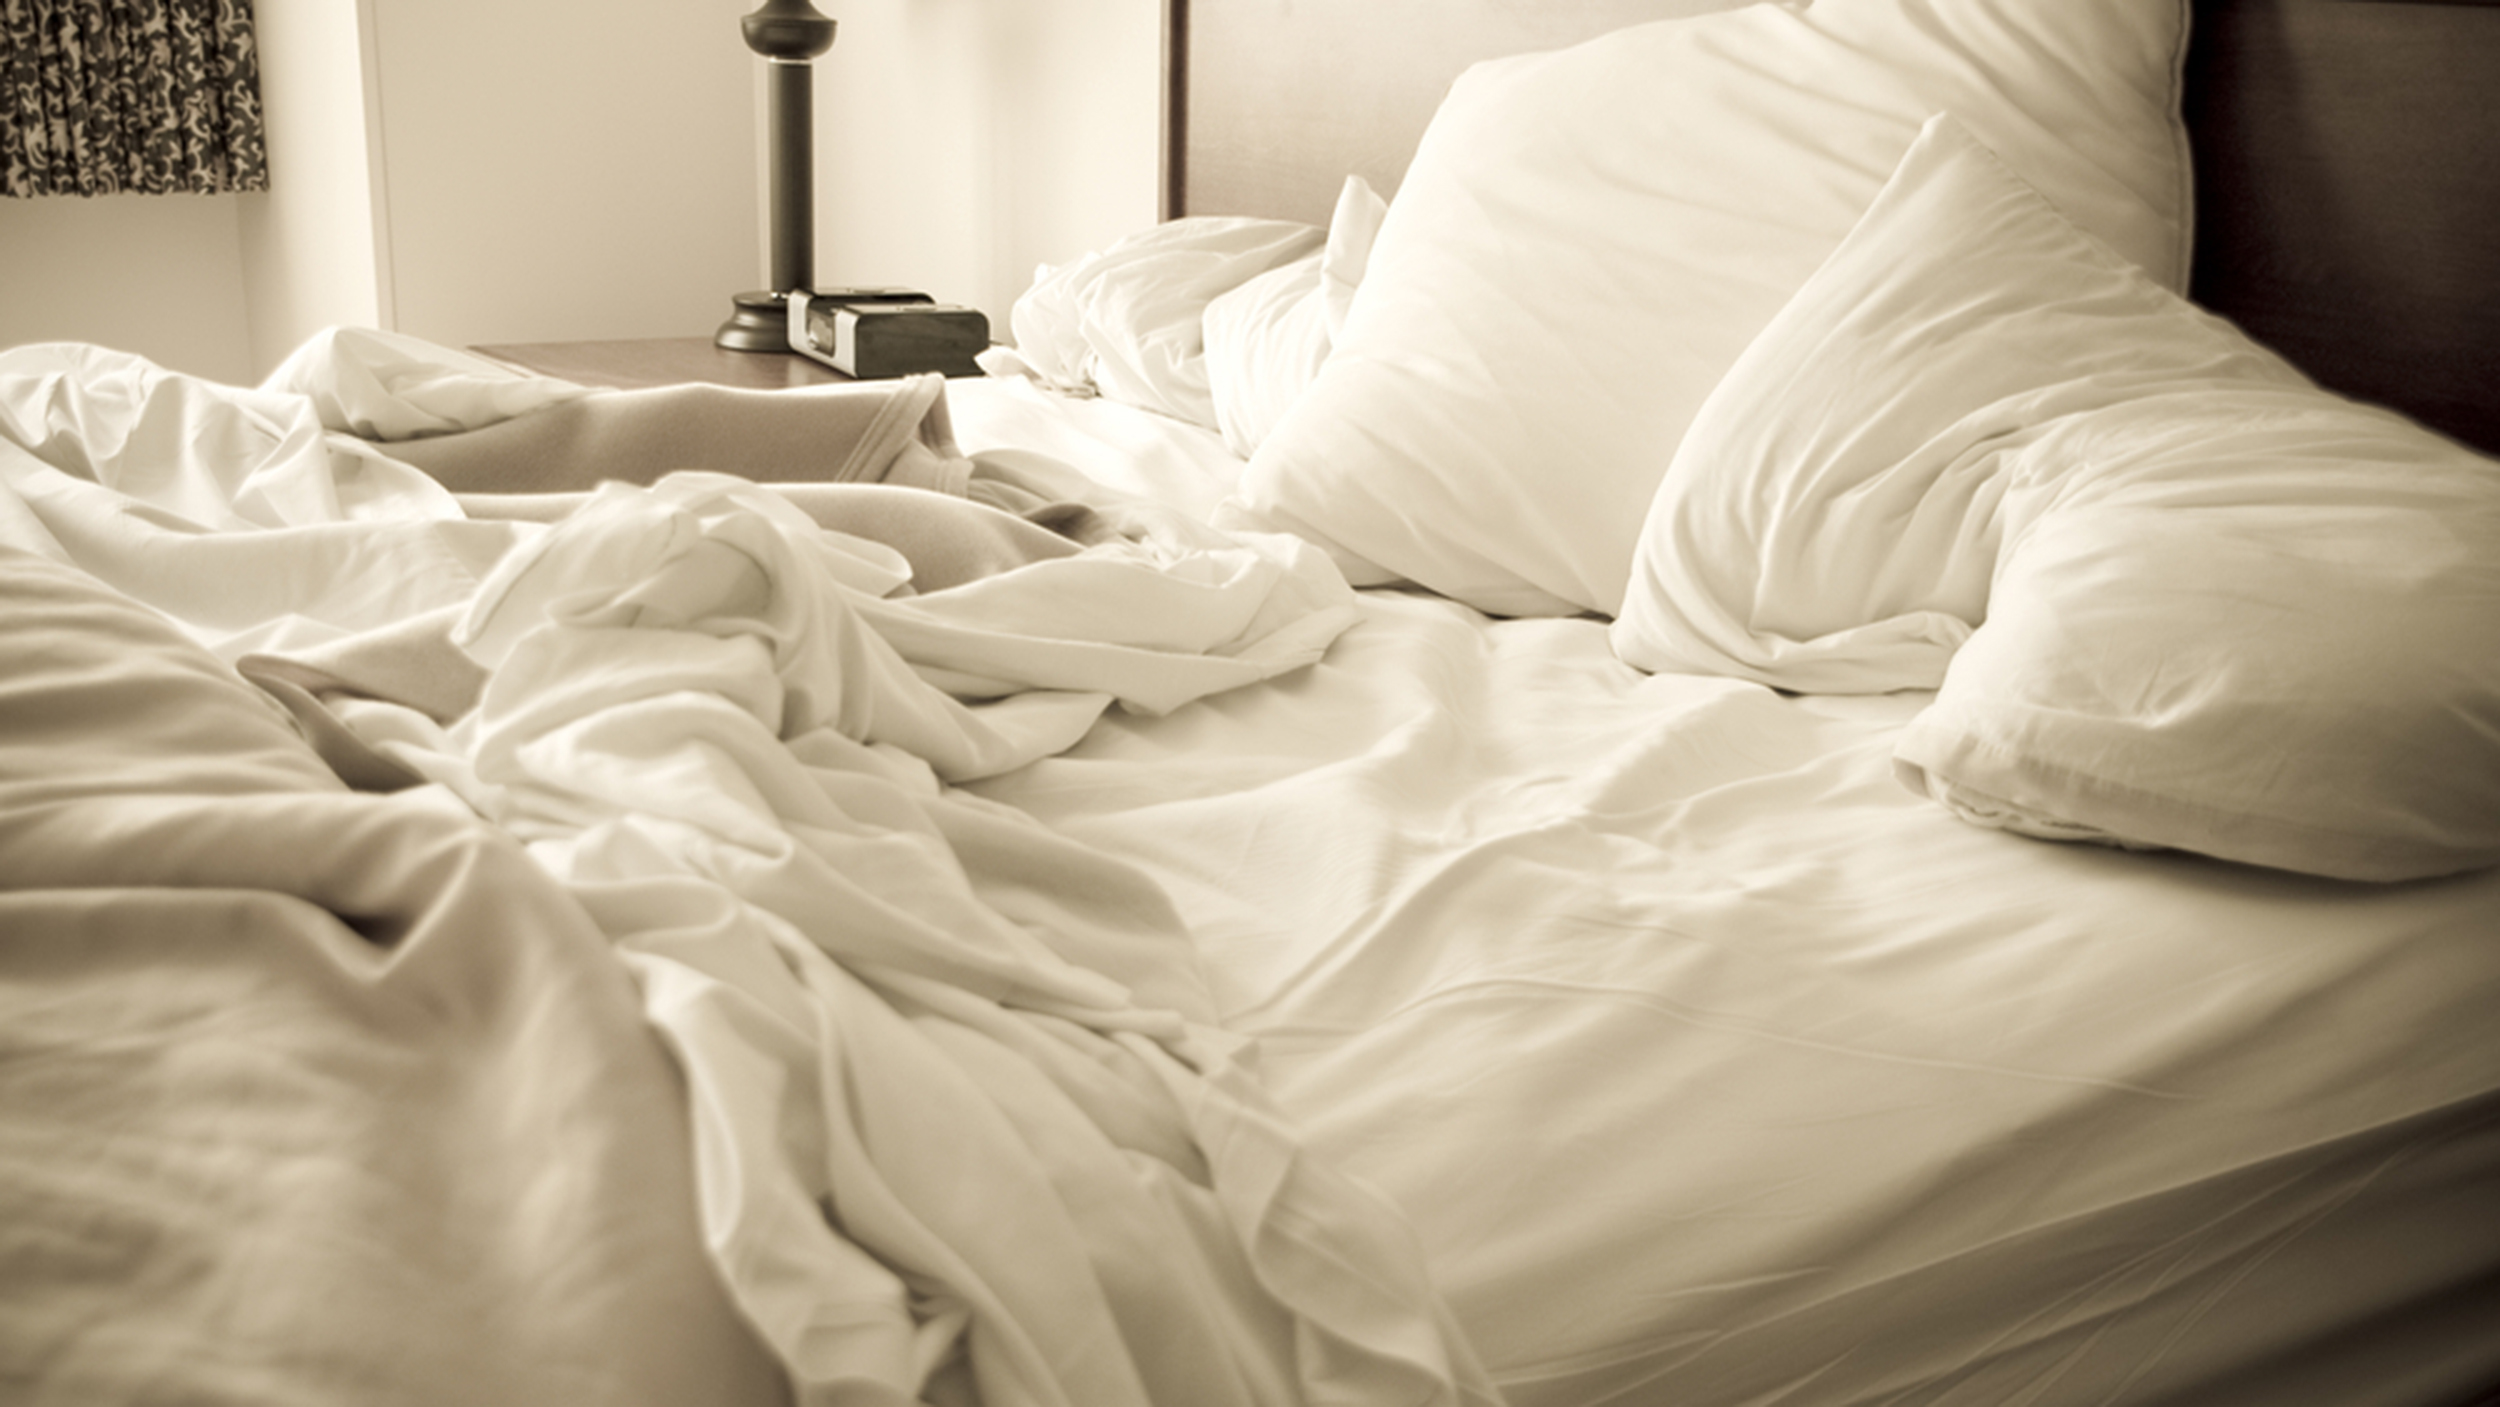 An unmade bed with white linens and a lamp in the corner.; Shutterstock ID 197136716; PO: MC for TODAY